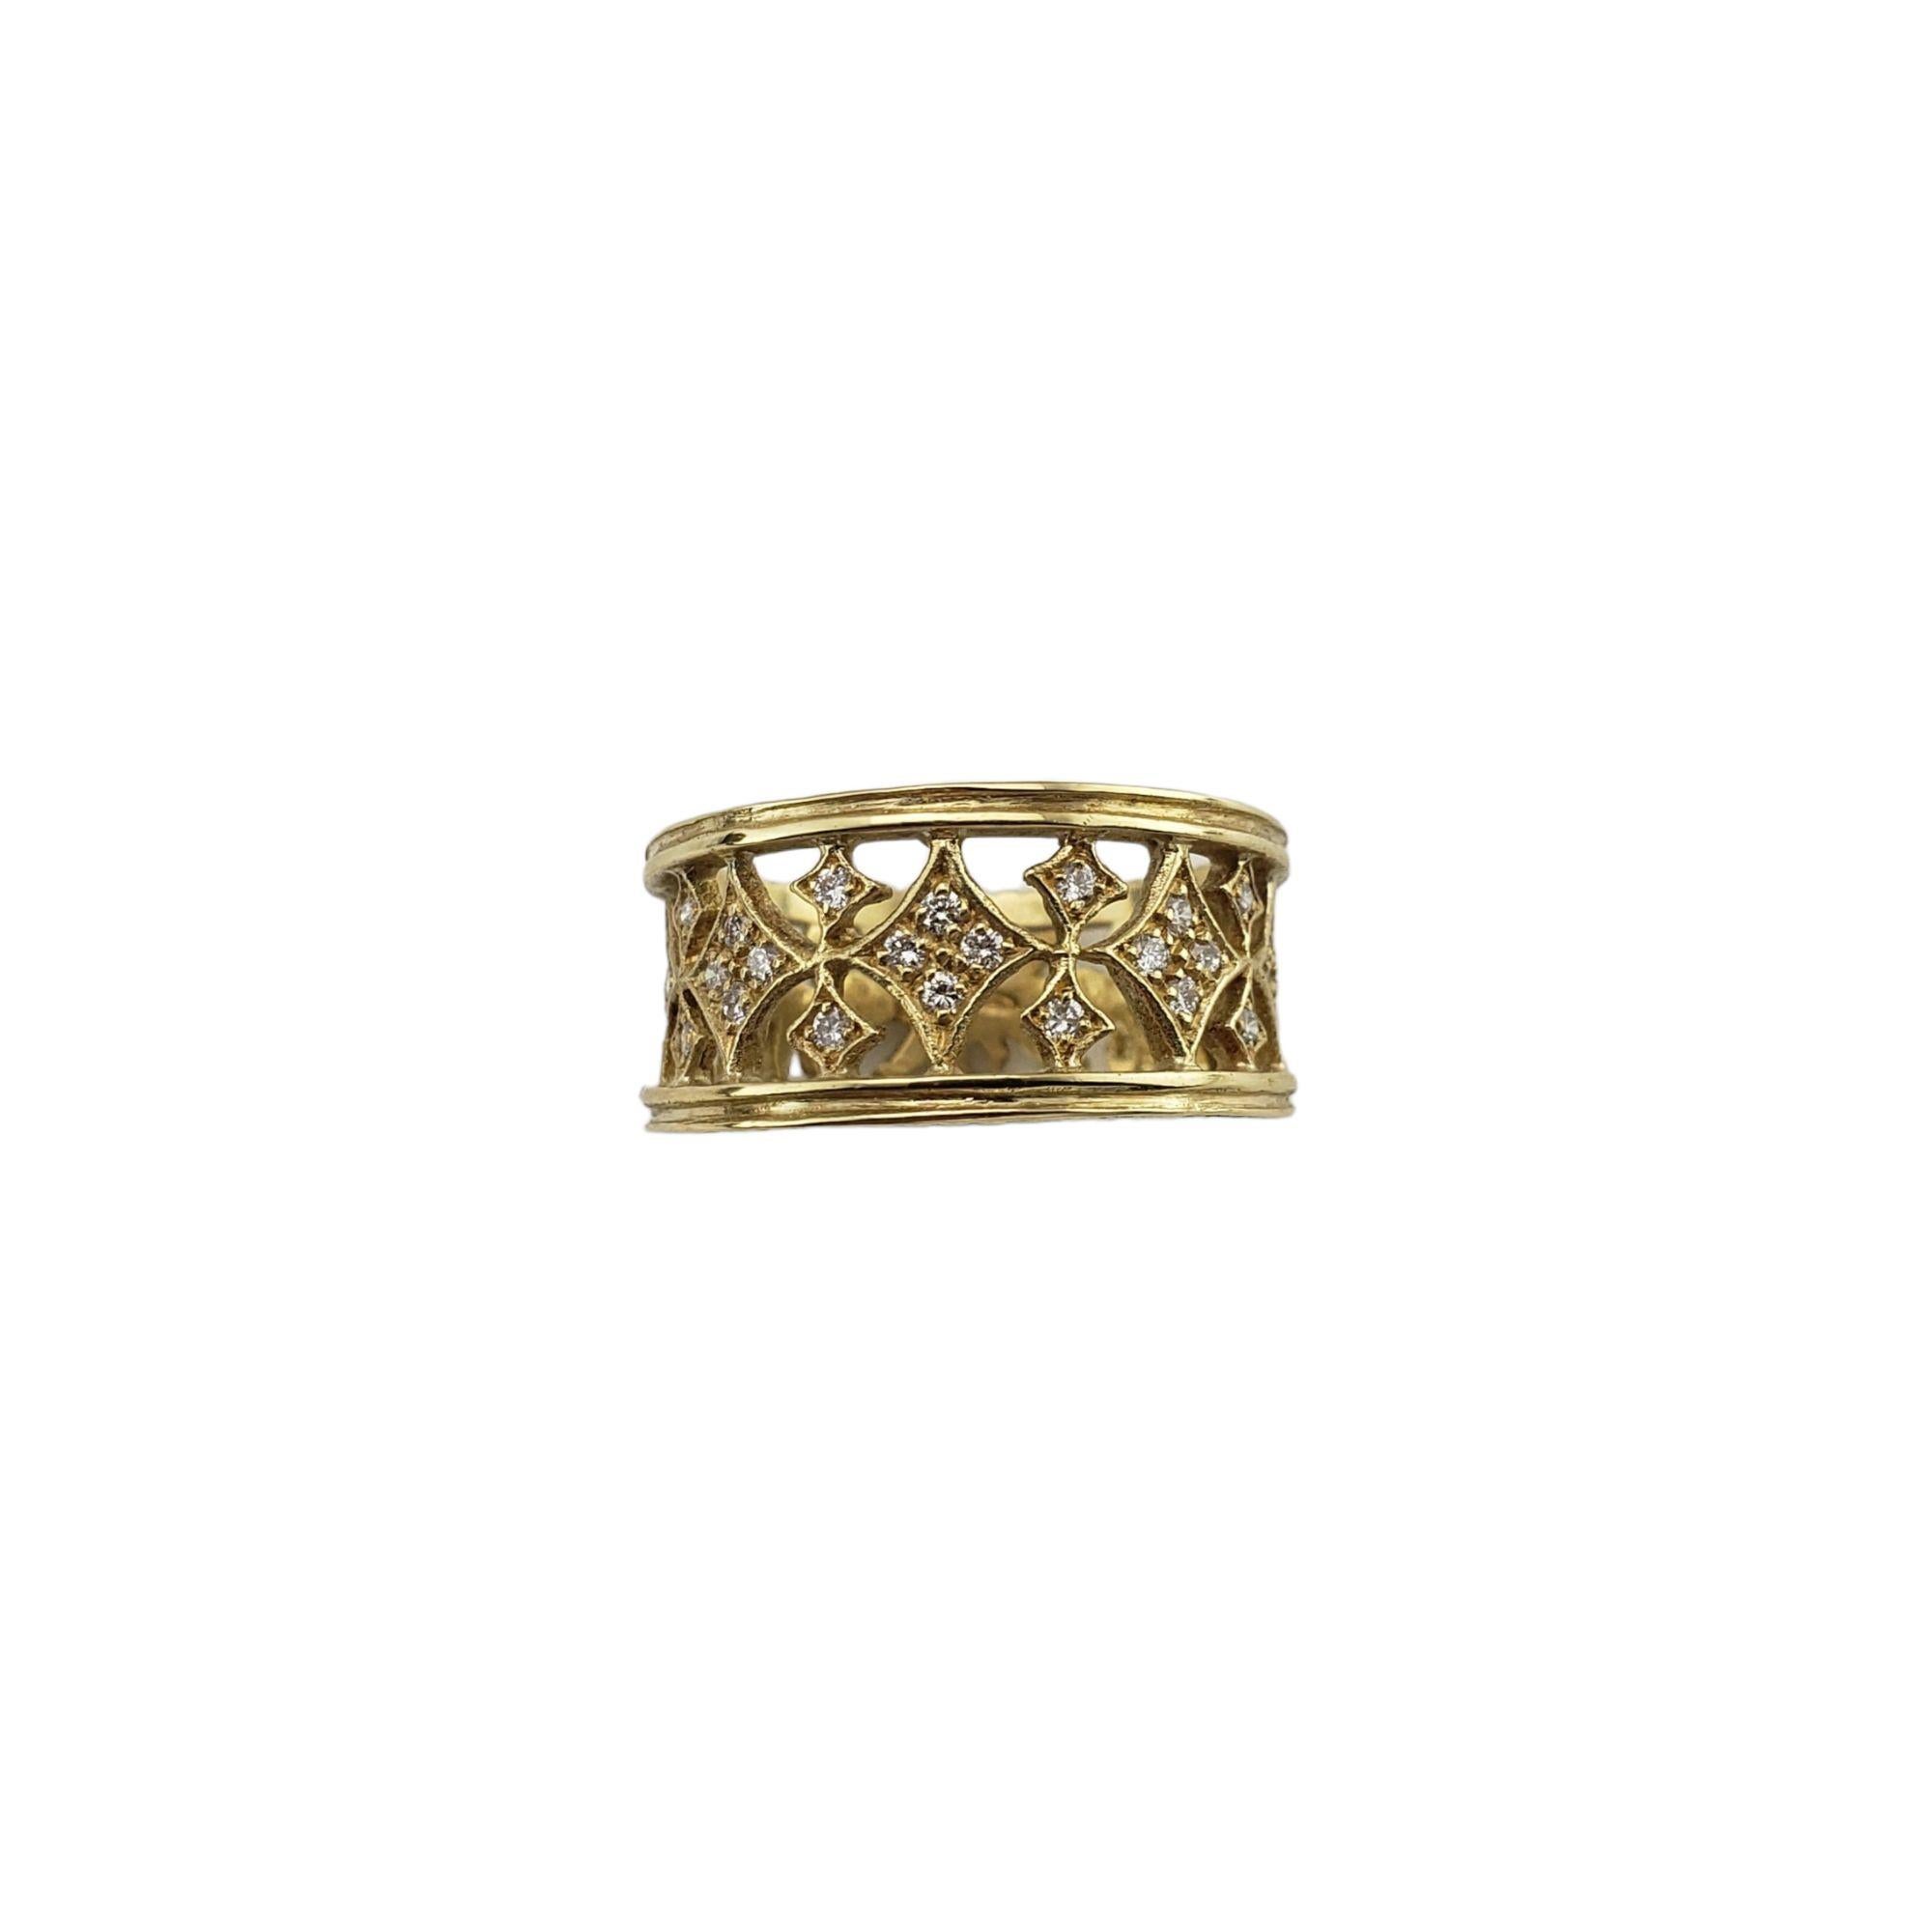 Vintage 18 Karat Yellow Gold and Diamond Band Ring Size 7-

This lovely band features 28 round brilliant cut diamonds set in beautifully detailed 18K yellow gold. Width: 9 mm.

Total diamond weight: .28 ct.

Diamond clarity: VS1

Diamond color: